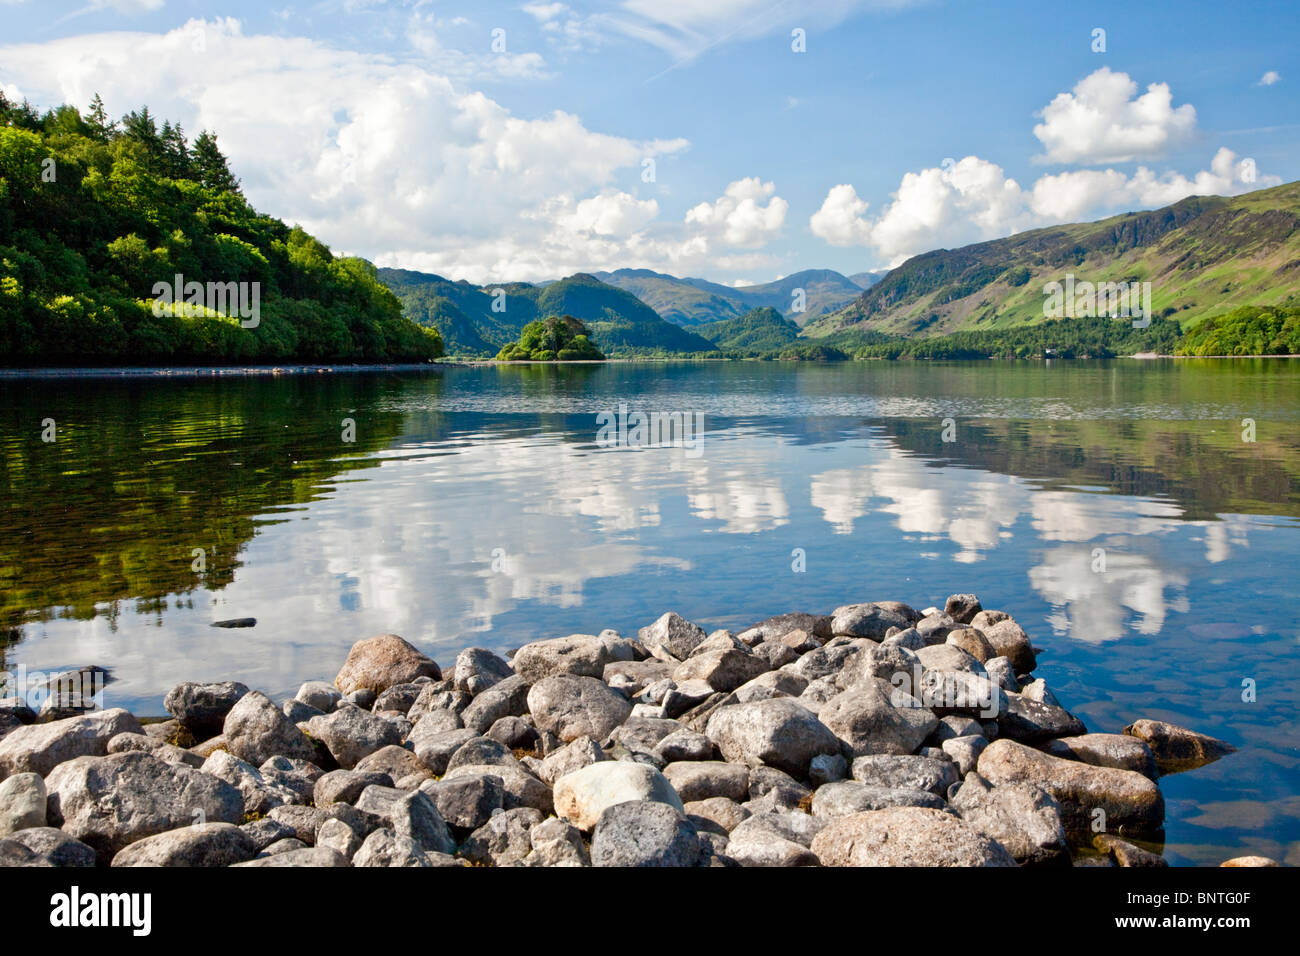 Derwent Water in the Lake District National Park, Cumbria, England, UK Stock Photo